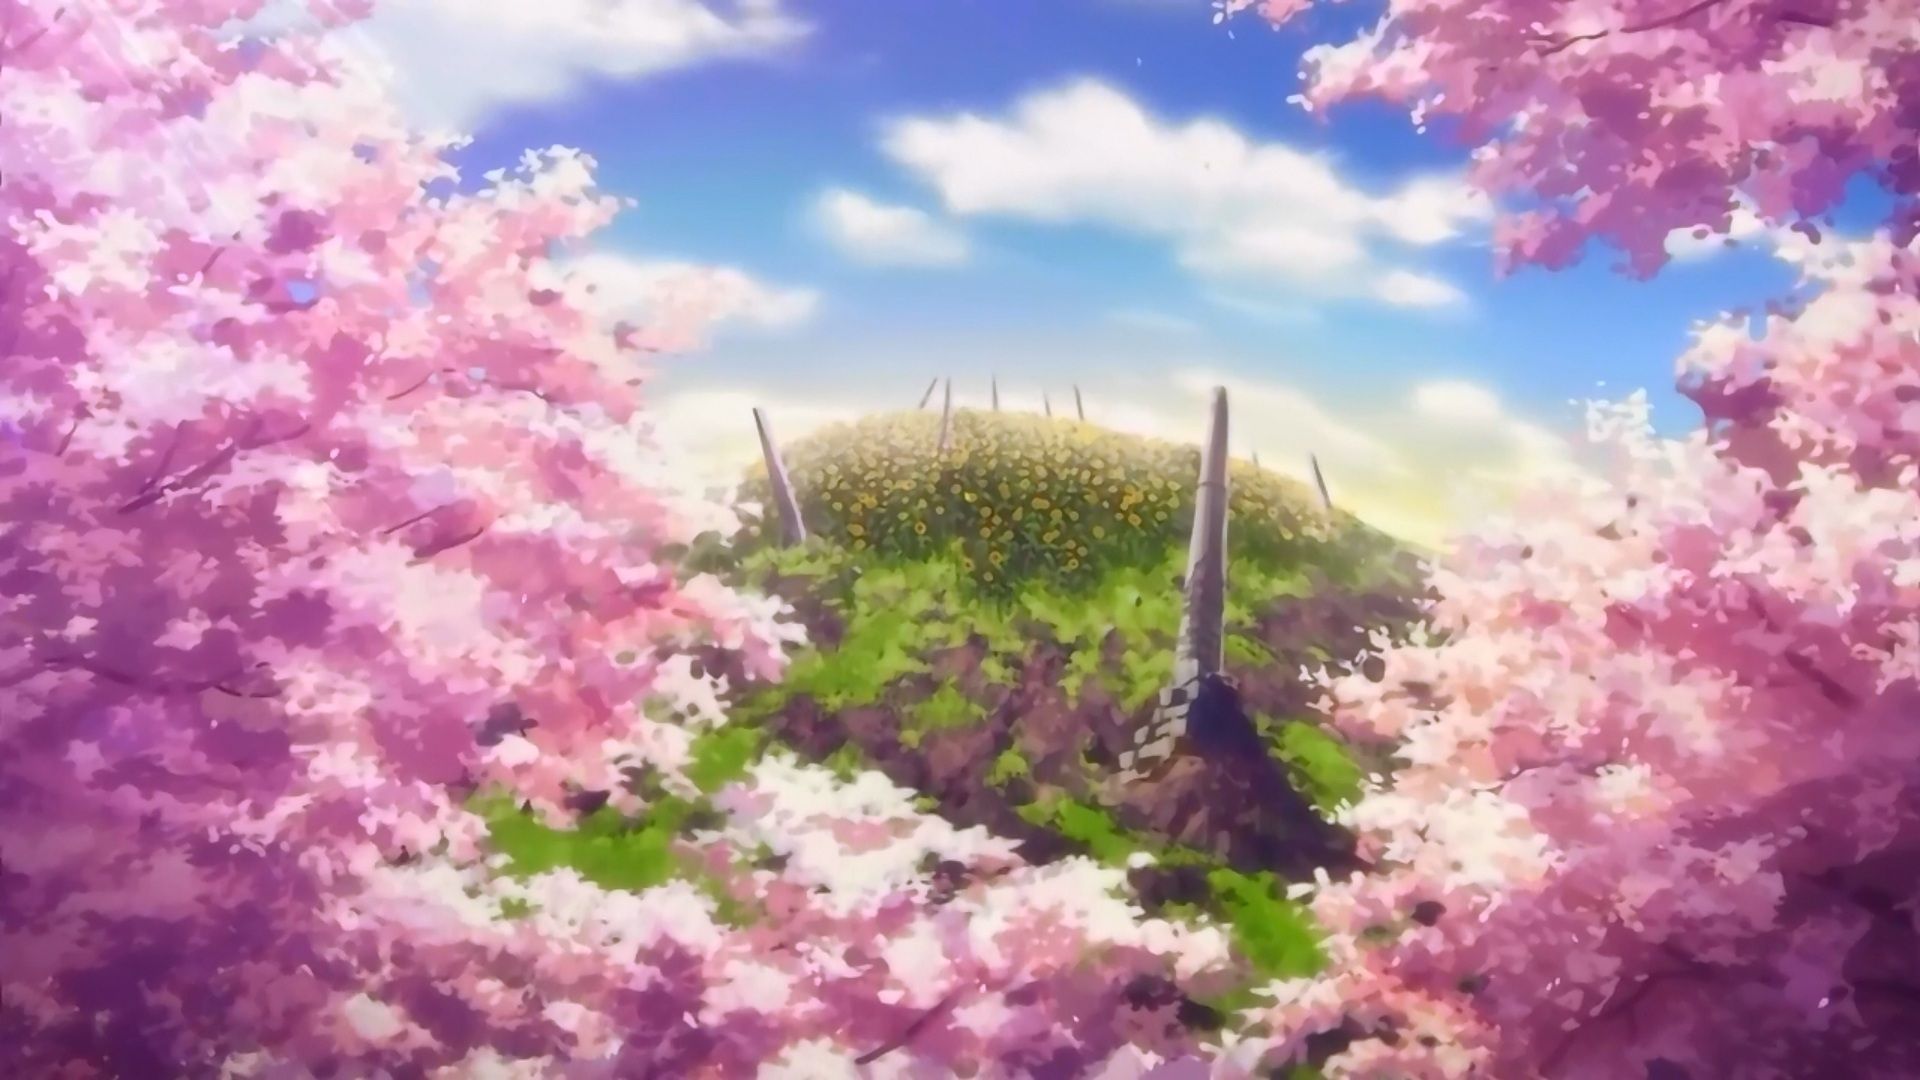 Beautiful anime landscapes. Anime scenery, Anime cherry blossom, Anime scenery wallpaper